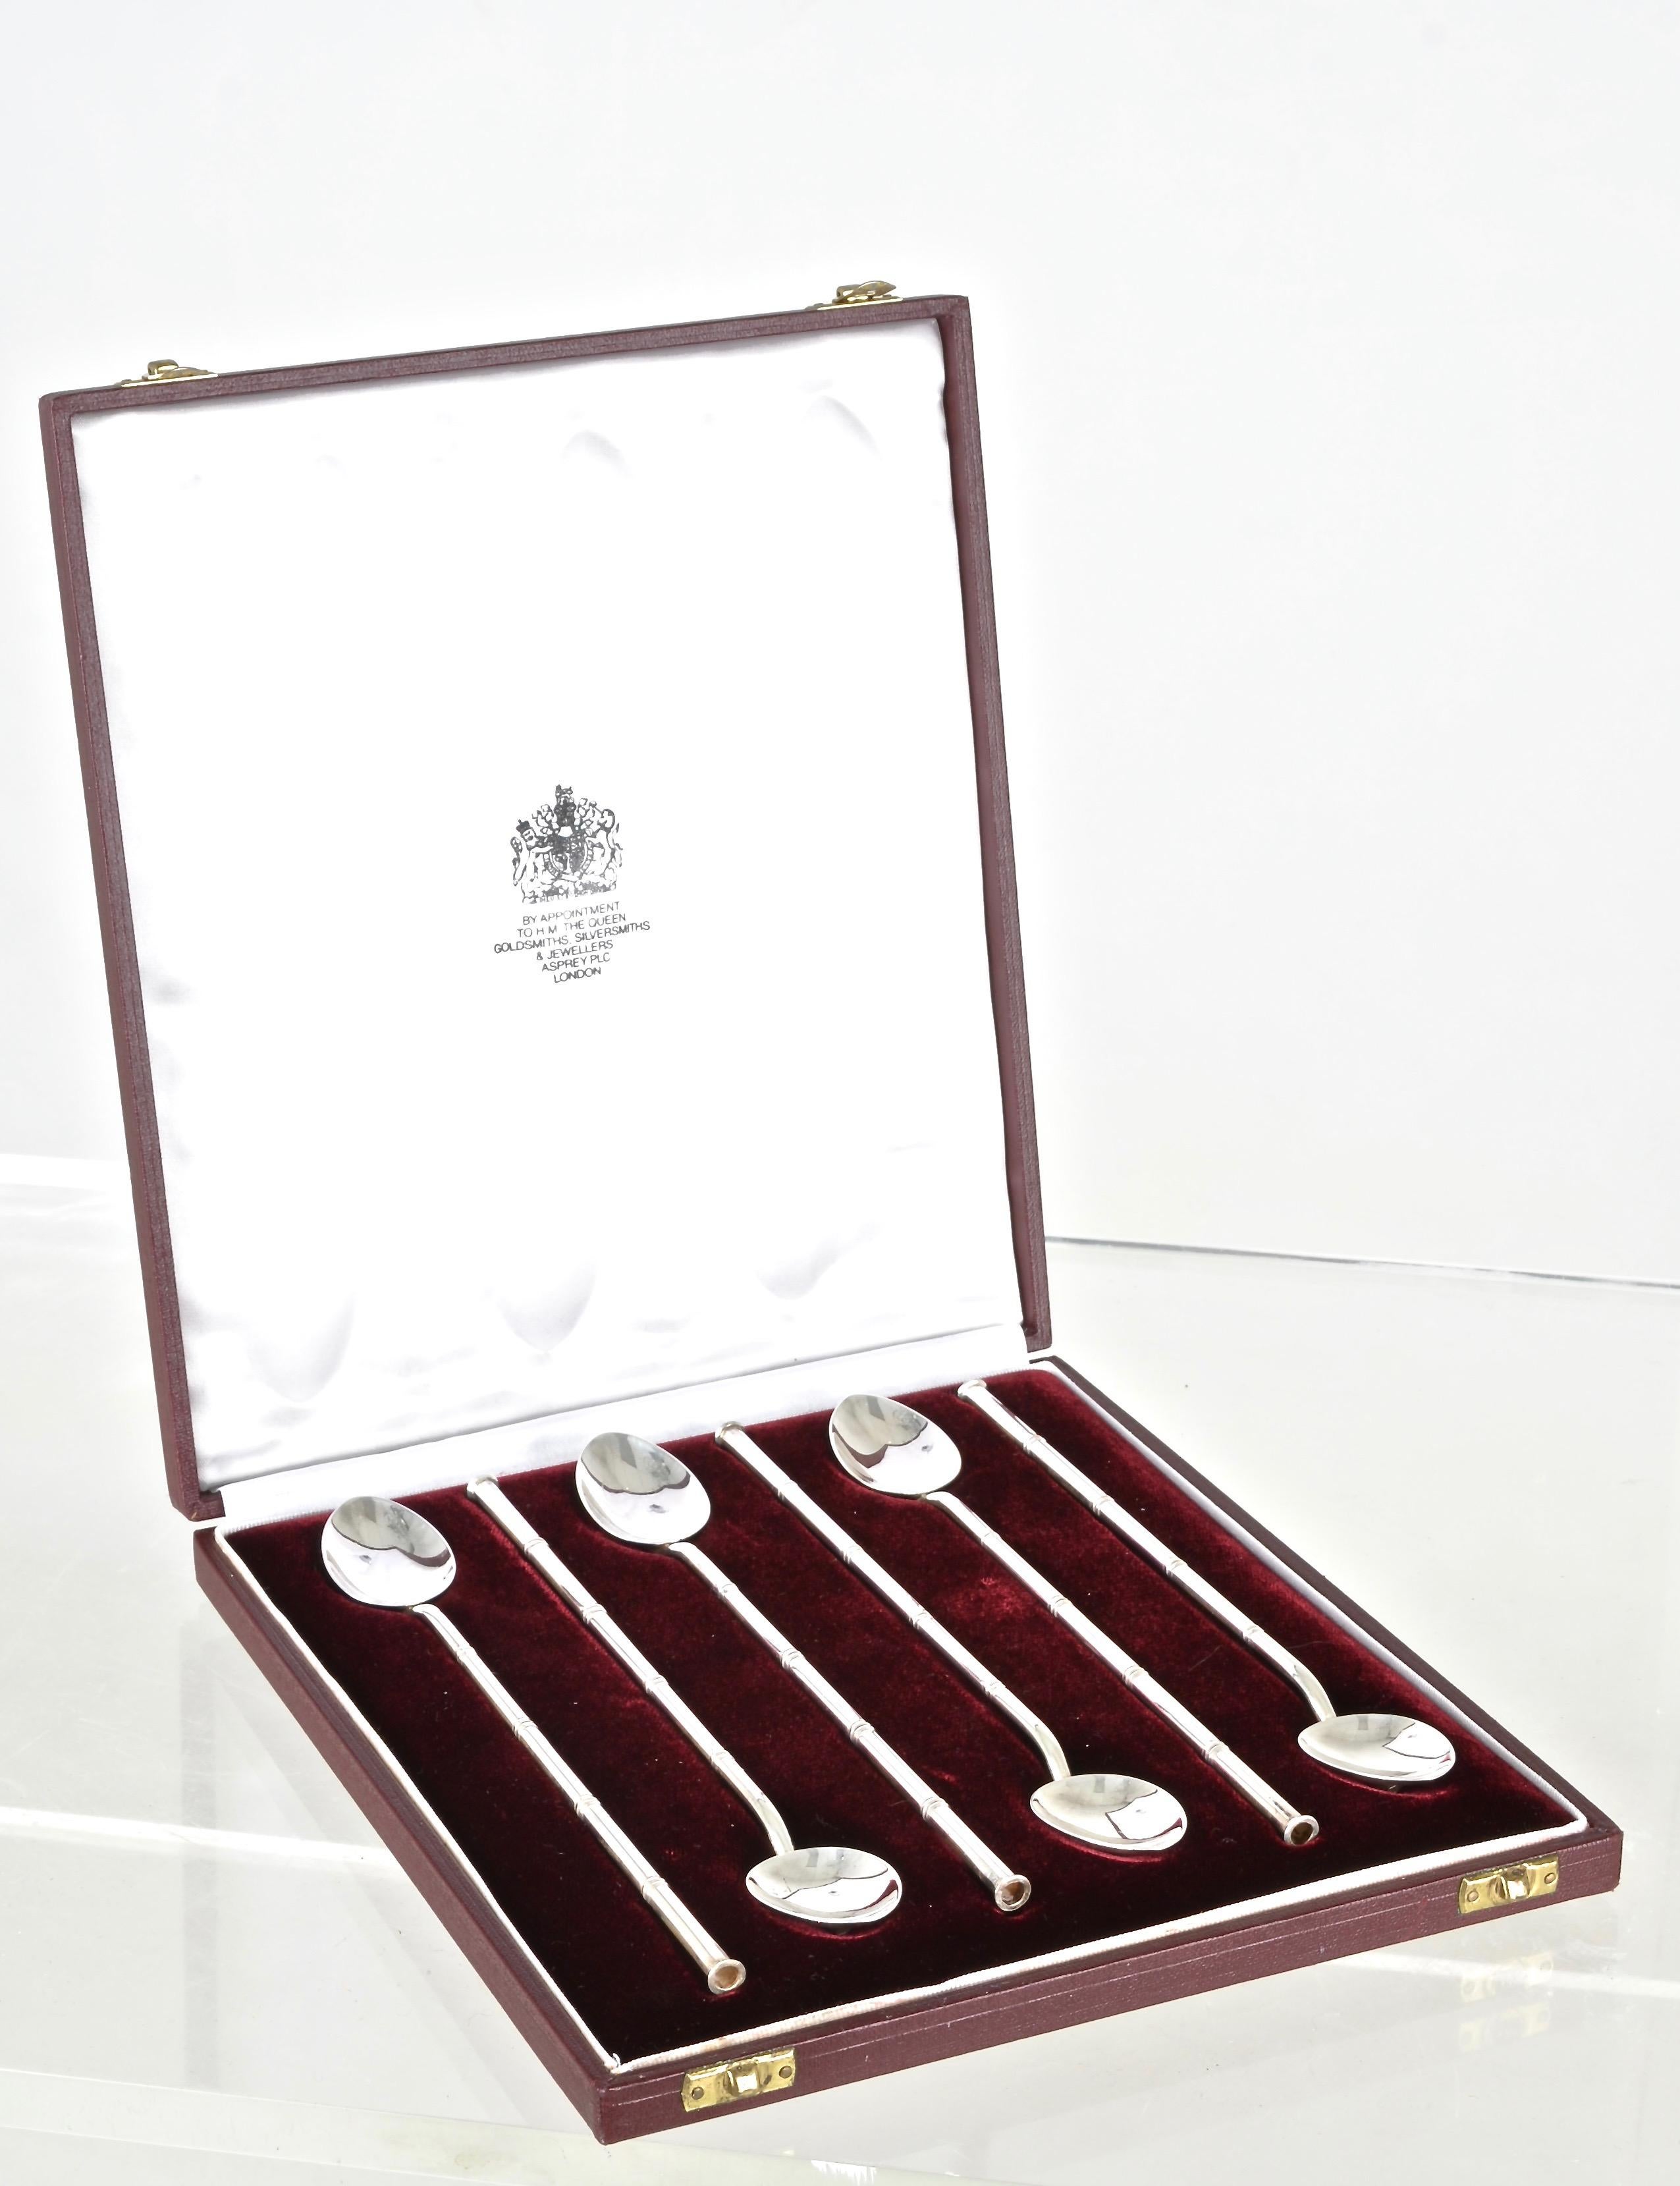 Just beautiful set of sipping stirrers by the revered silversmiths Asprey of London. Classic faux bamboo styling with simple flat spoon. Ultimate replacement for plastic straws! In original custom leather case. Embossed hallmark on each stirrer.